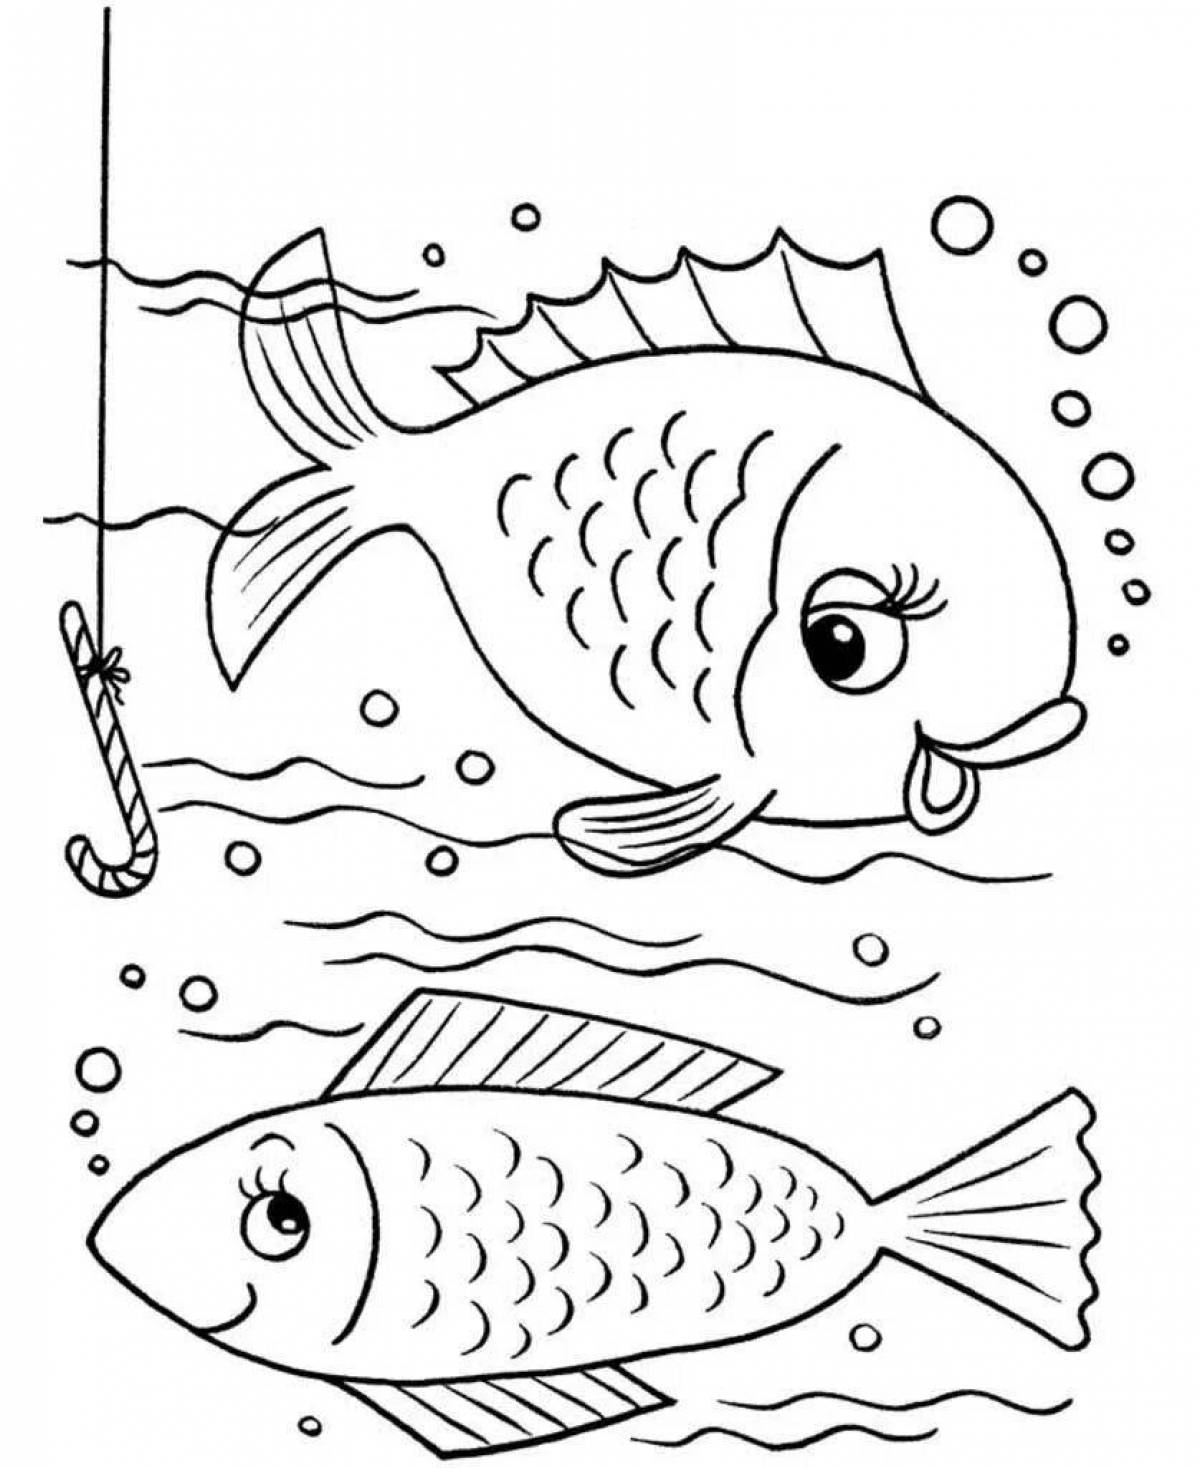 Incredible fish coloring book for boys